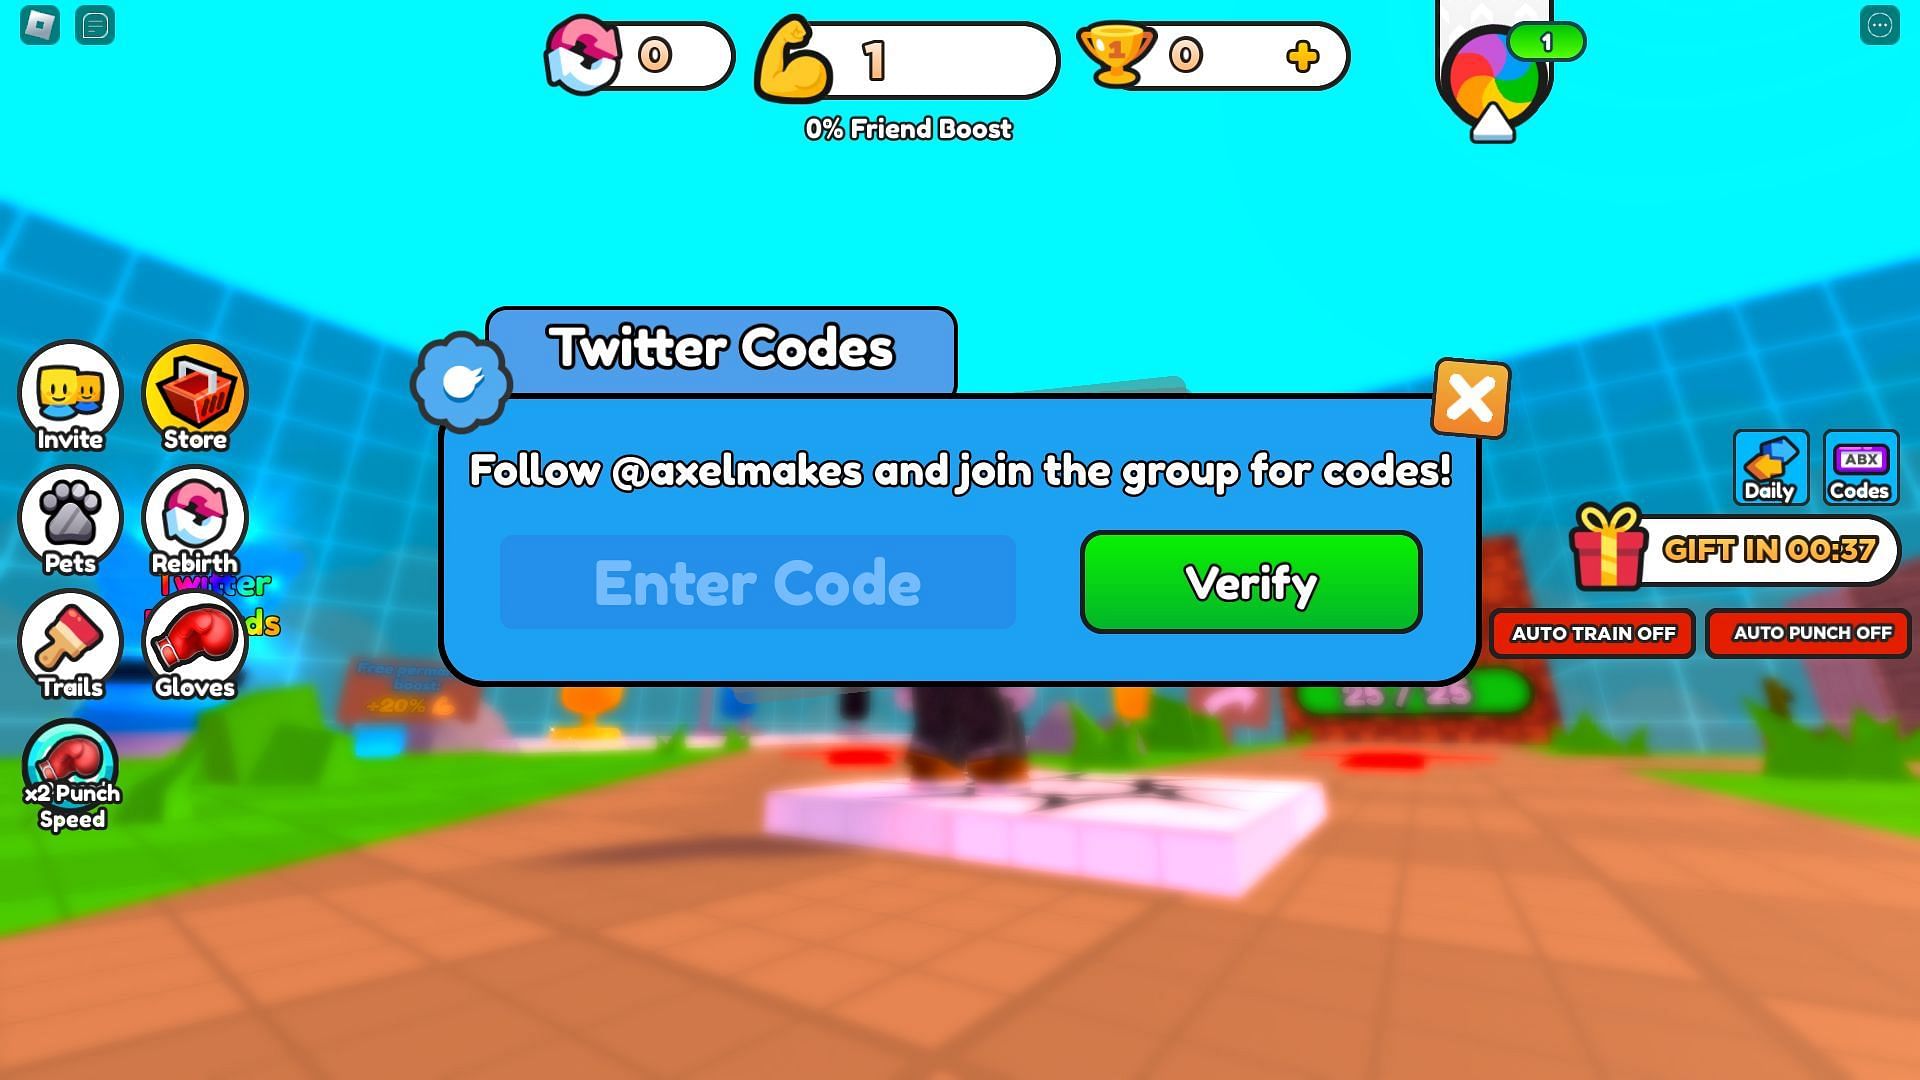 Active codes for Punch Wall Simulator (Image via Roblox)